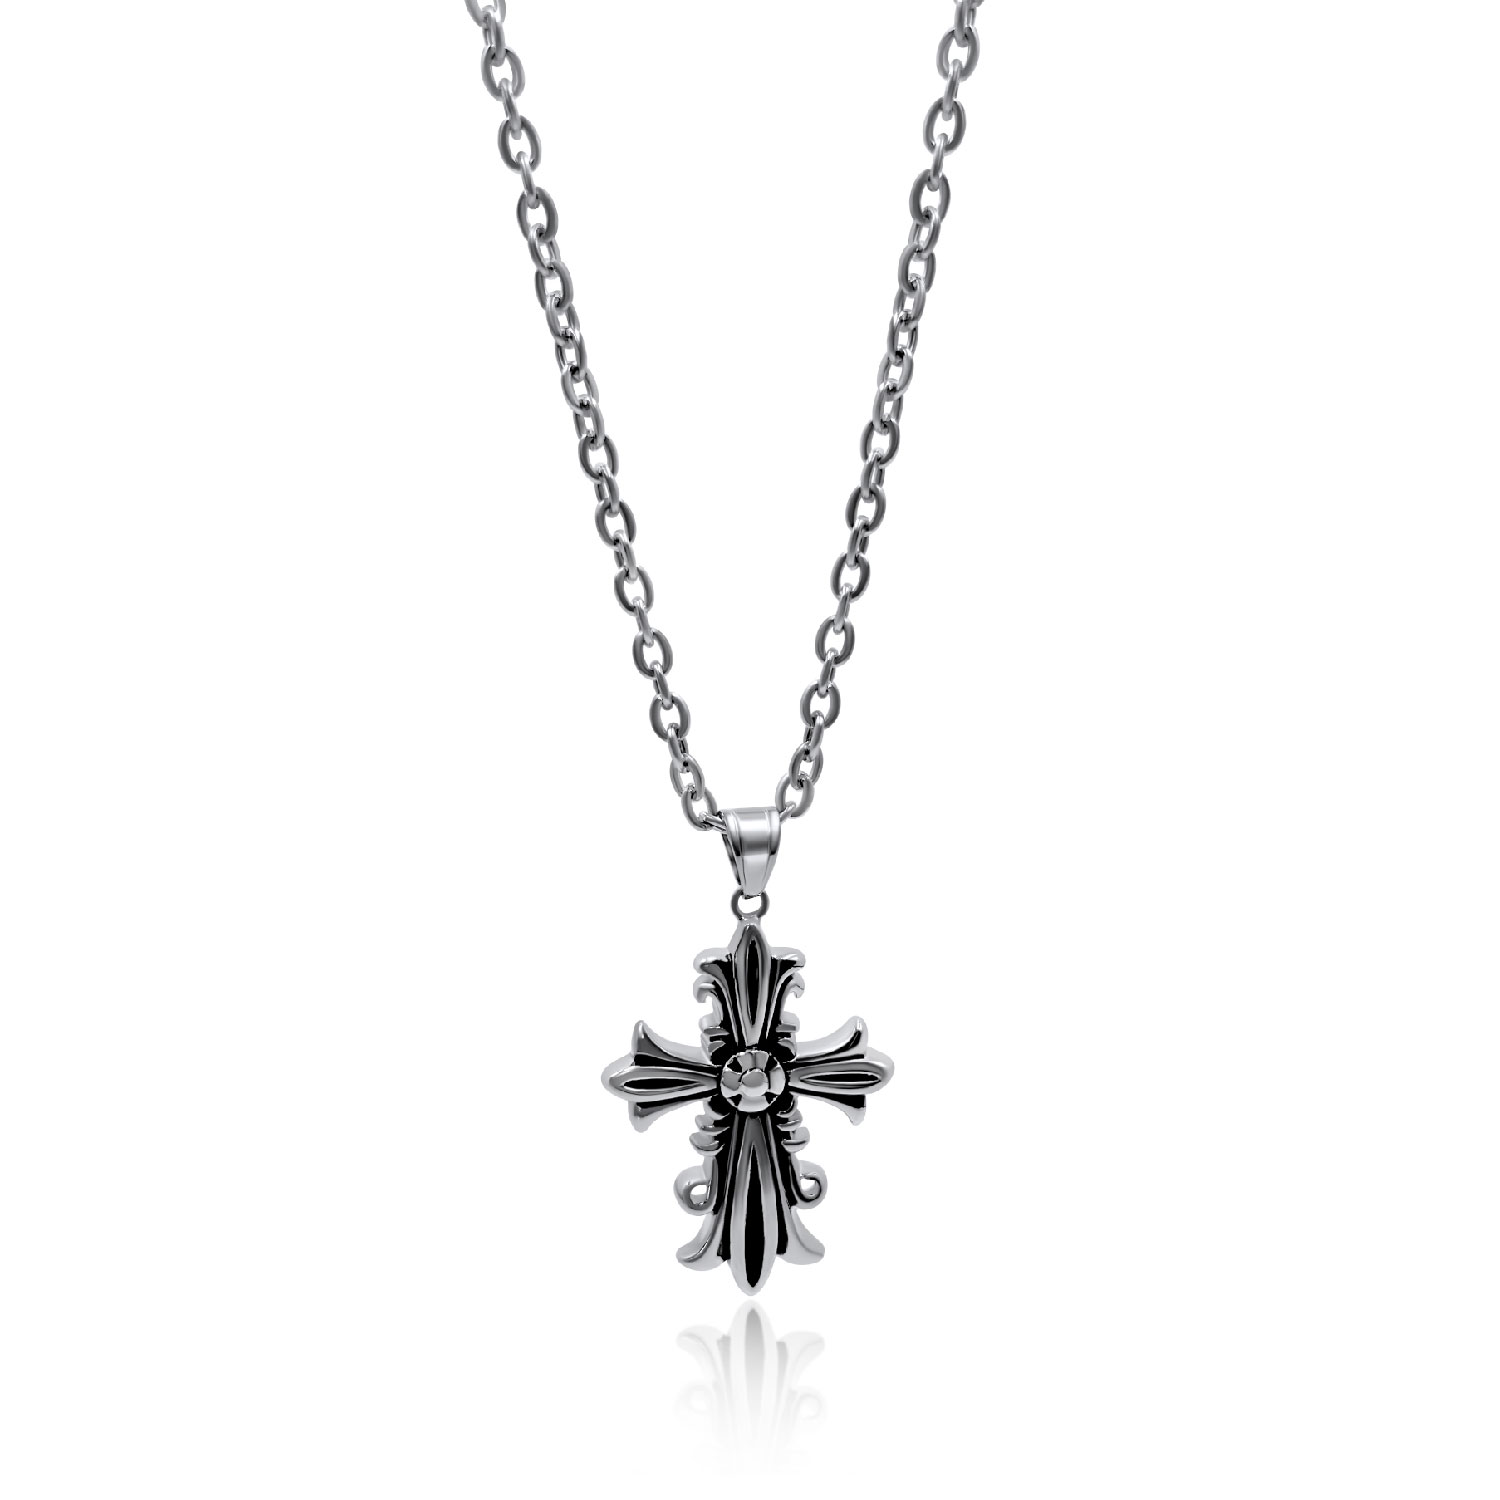 Women’s Oversized Silver Cross Necklace Androhmeda Jewelry